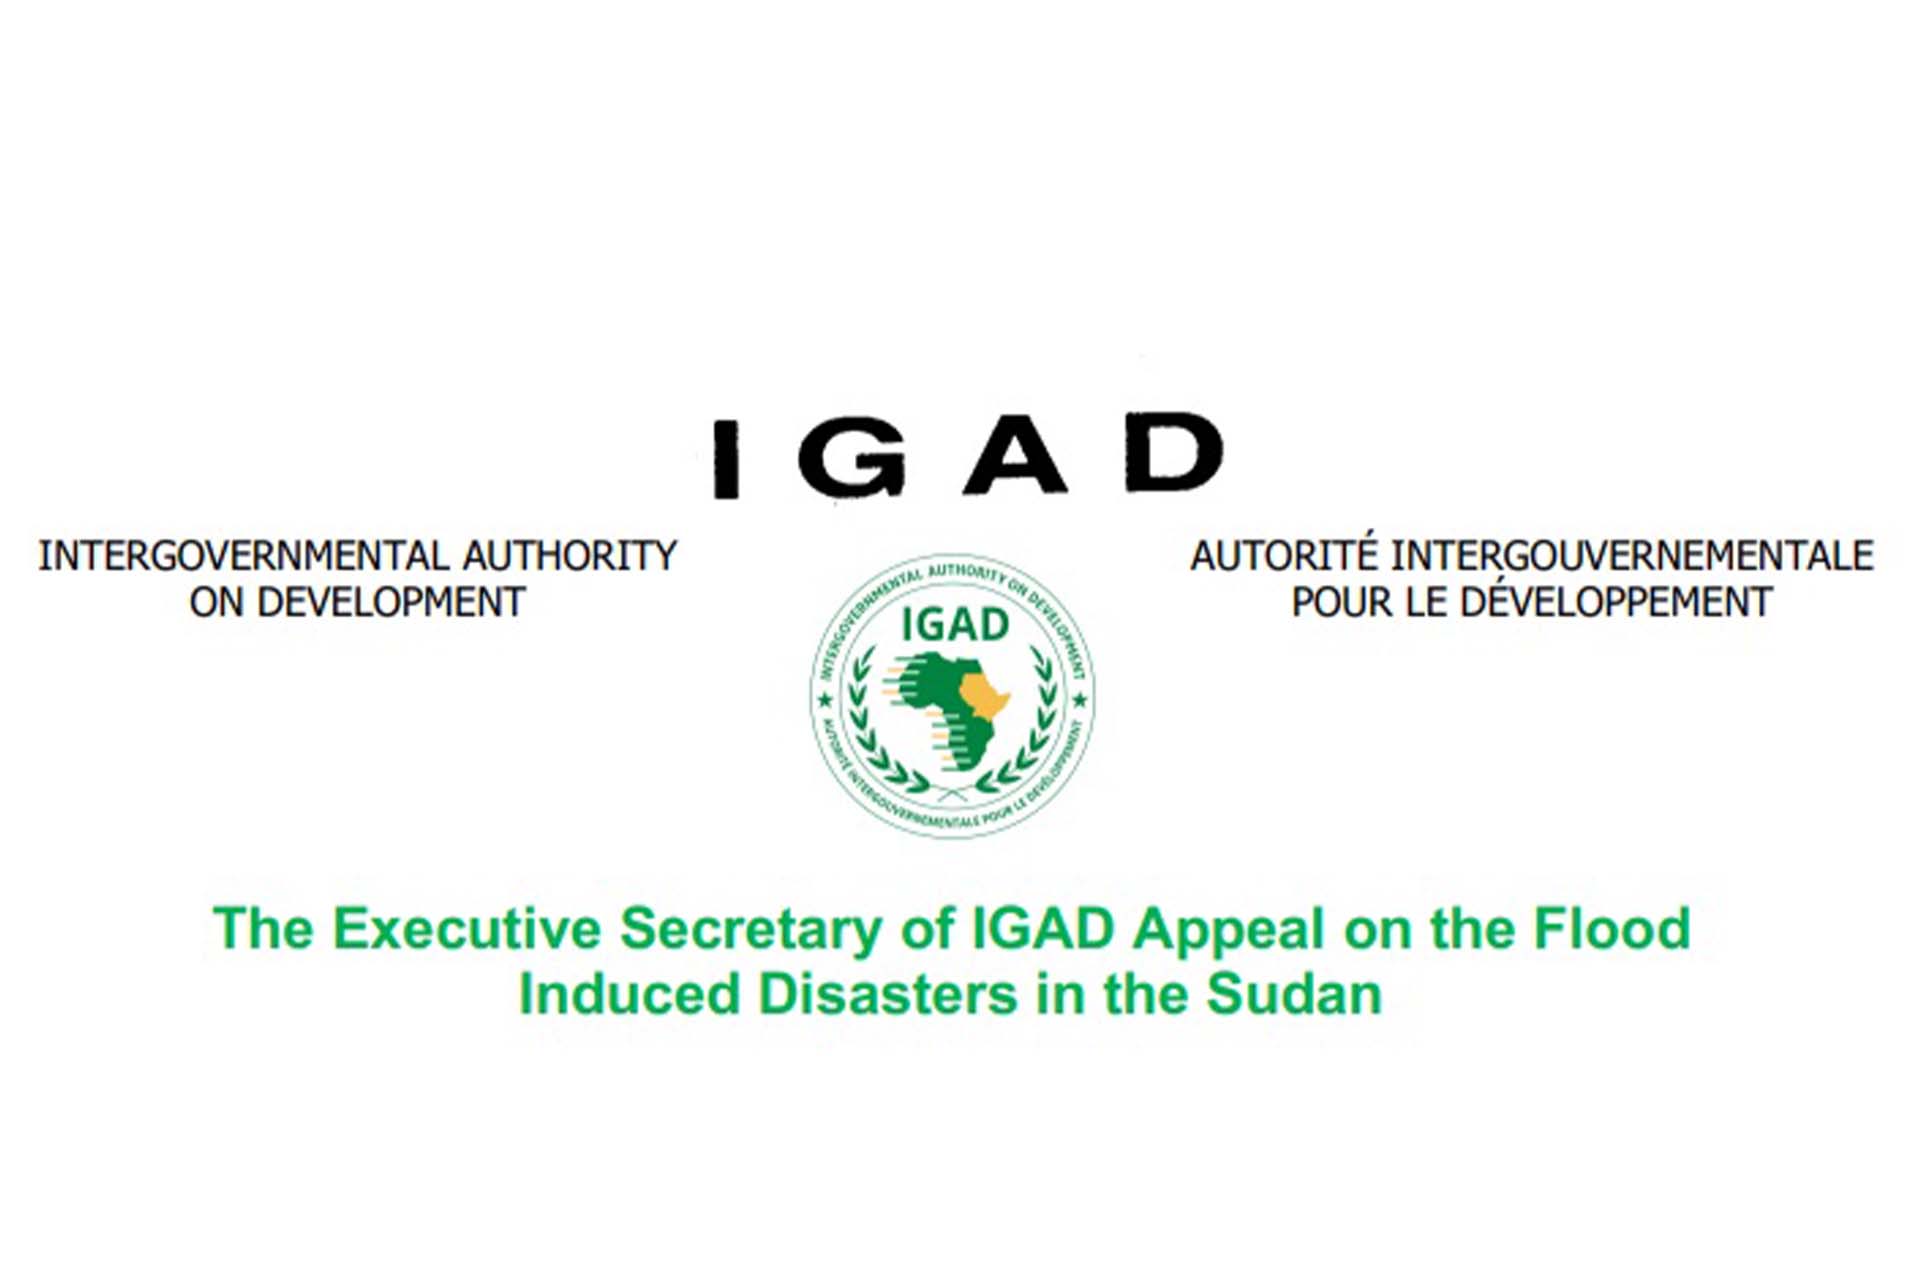 The Executive Secretary of IGAD Appeal on the Flood Induced Disasters in the Sudan